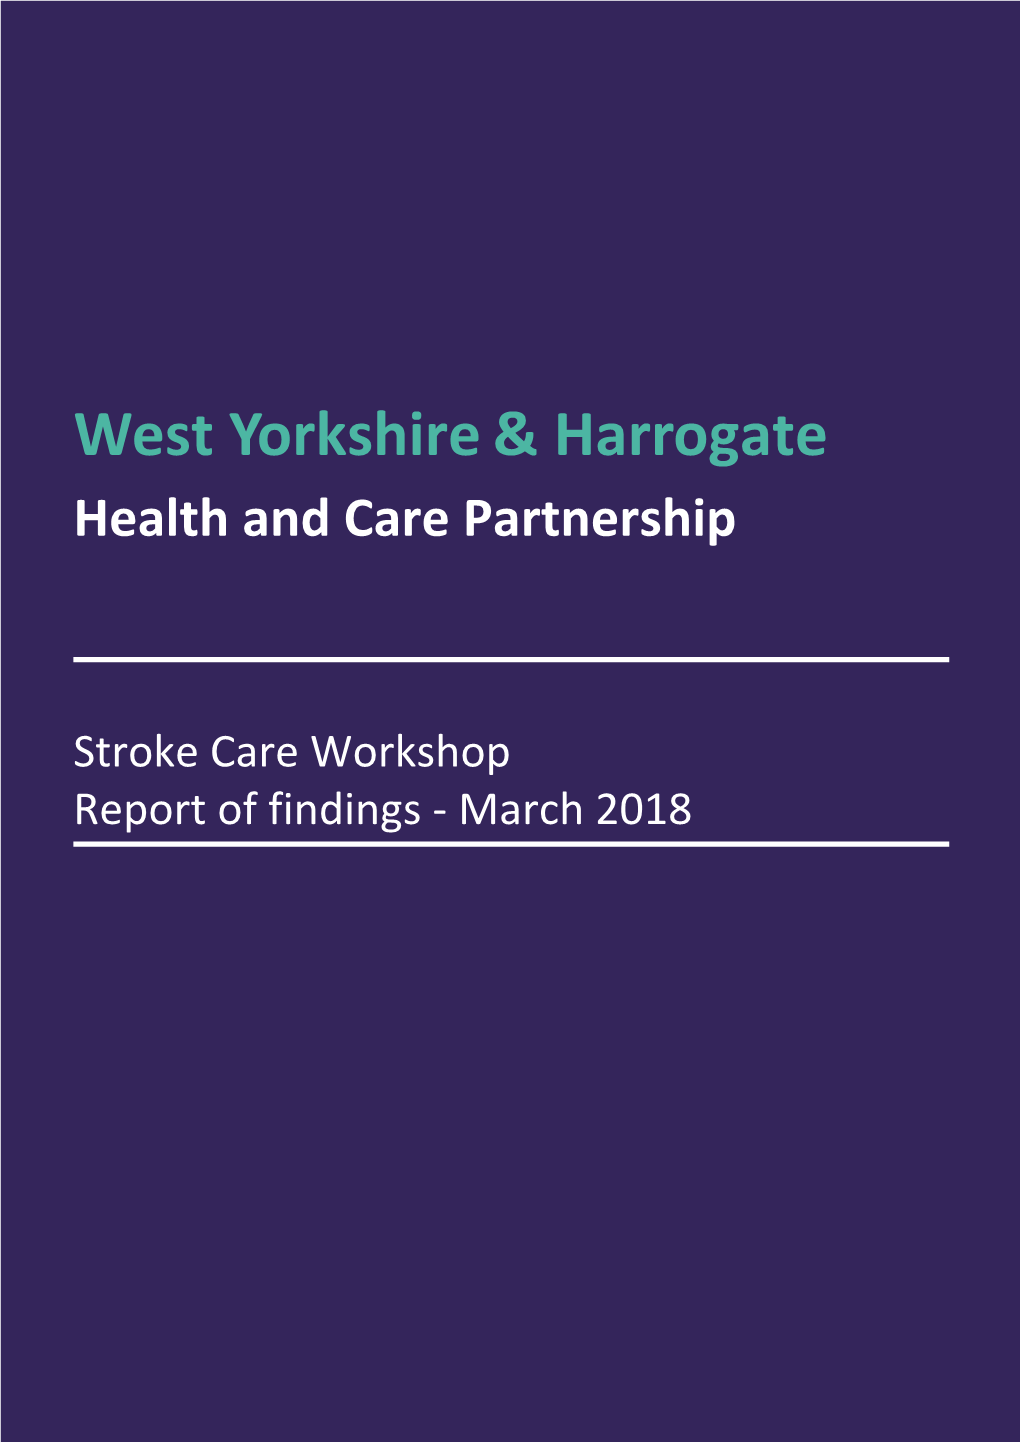 Stroke Care Workshop Report of Findings - March 2018 Contents Page